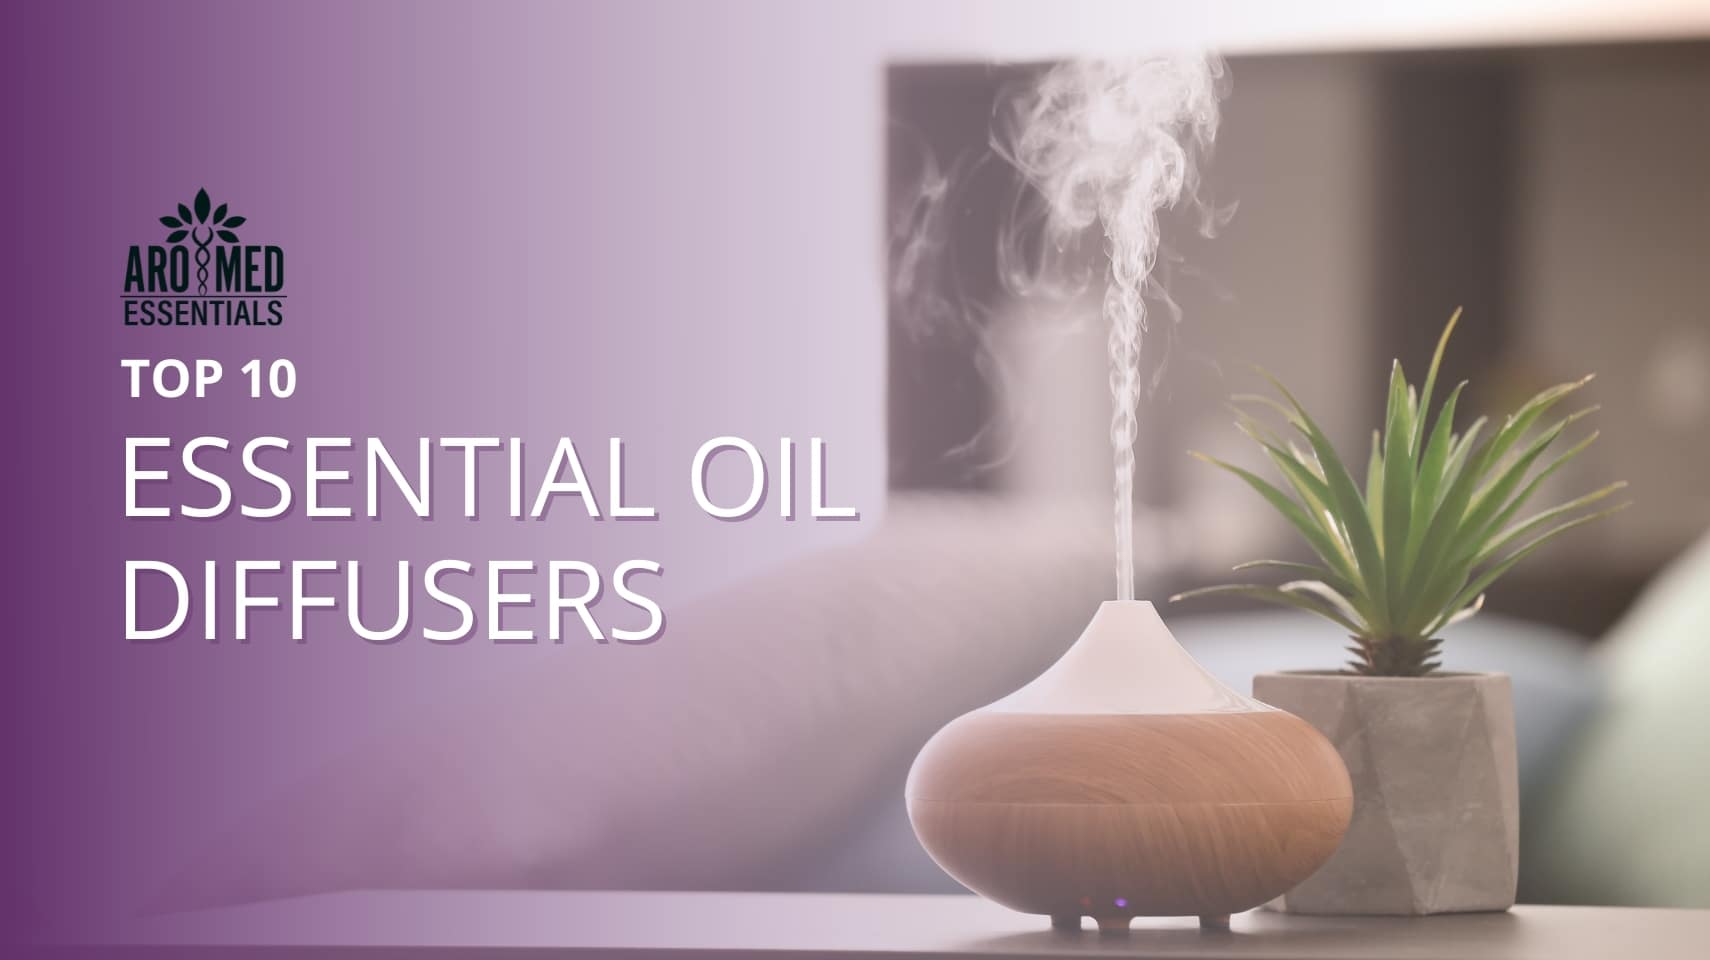  Essential Oil Diffusers for Home with Top 10 Oil